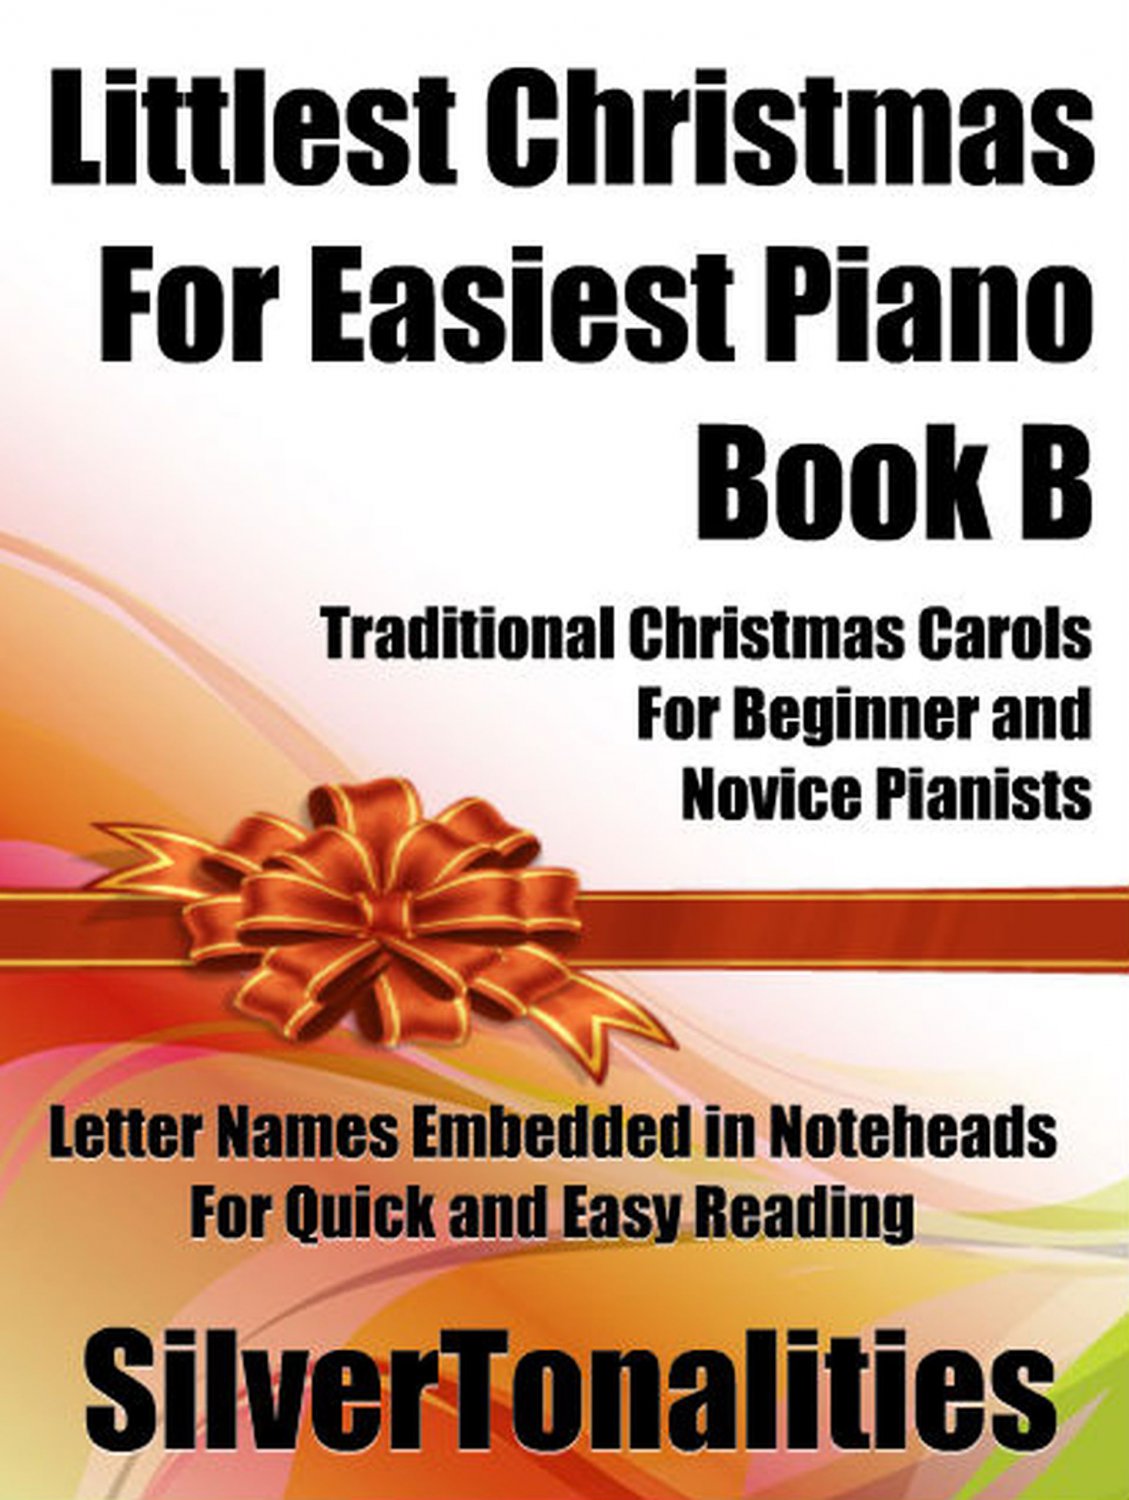 Littlest Christmas for Easiest Piano Book B